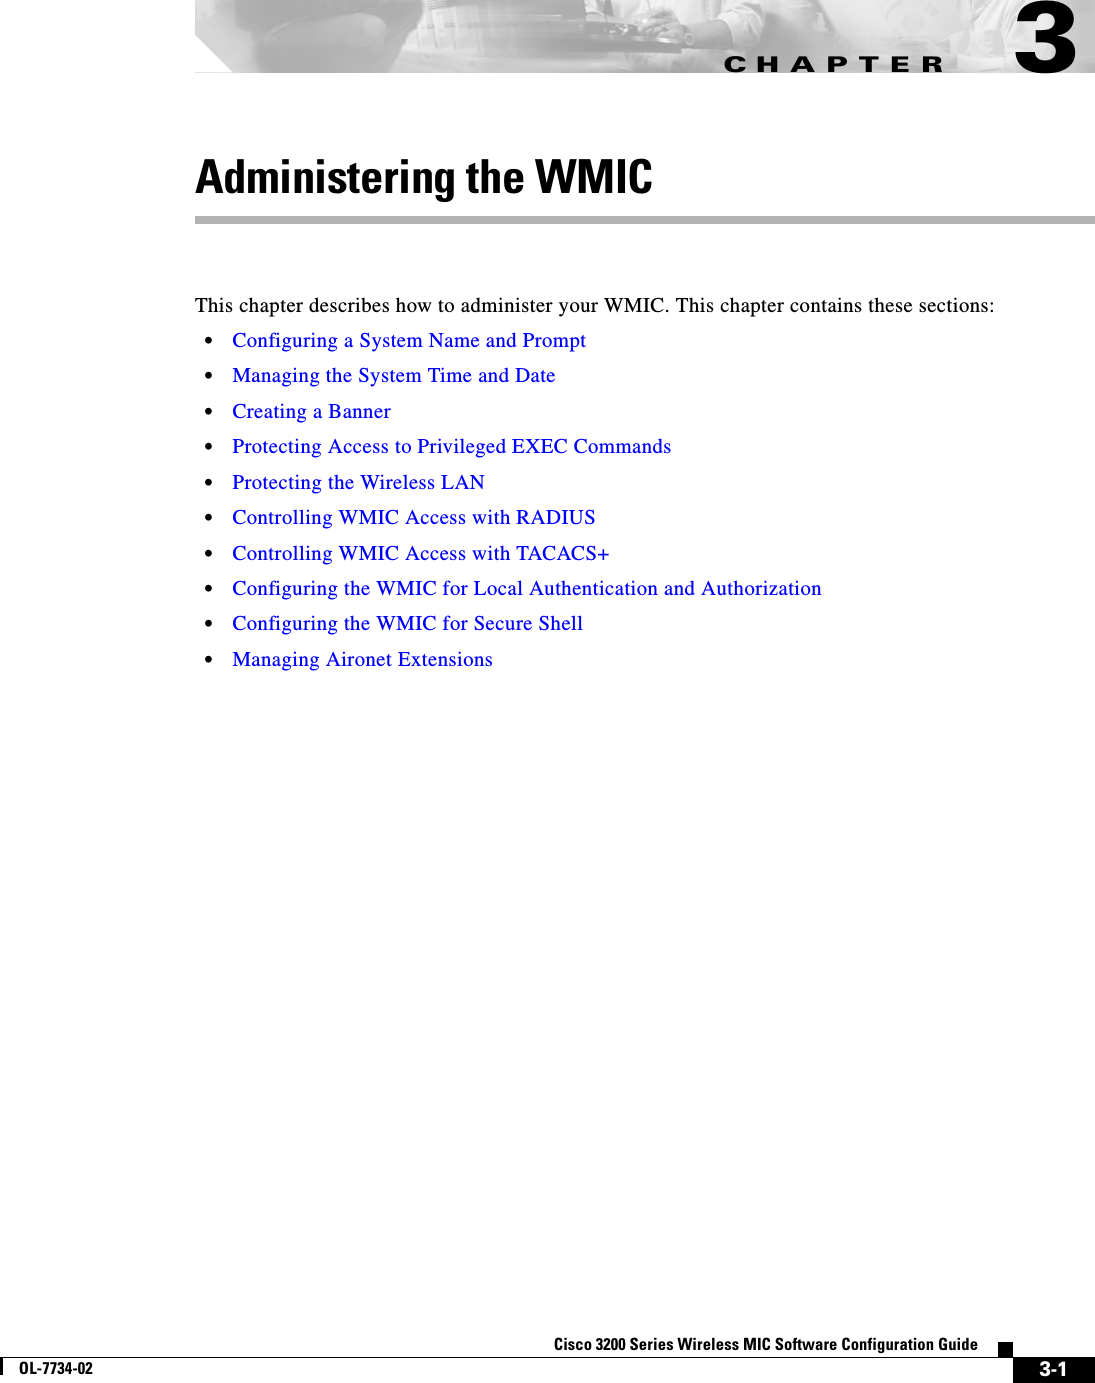 CHAPTER3-1Cisco 3200 Series Wireless MIC Software Configuration GuideOL-7734-023Administering the WMICThis chapter describes how to administer your WMIC. This chapter contains these sections:•Configuring a System Name and Prompt•Managing the System Time and Date•Creating a Banner•Protecting Access to Privileged EXEC Commands•Protecting the Wireless LAN•Controlling WMIC Access with RADIUS•Controlling WMIC Access with TACACS+•Configuring the WMIC for Local Authentication and Authorization•Configuring the WMIC for Secure Shell•Managing Aironet Extensions